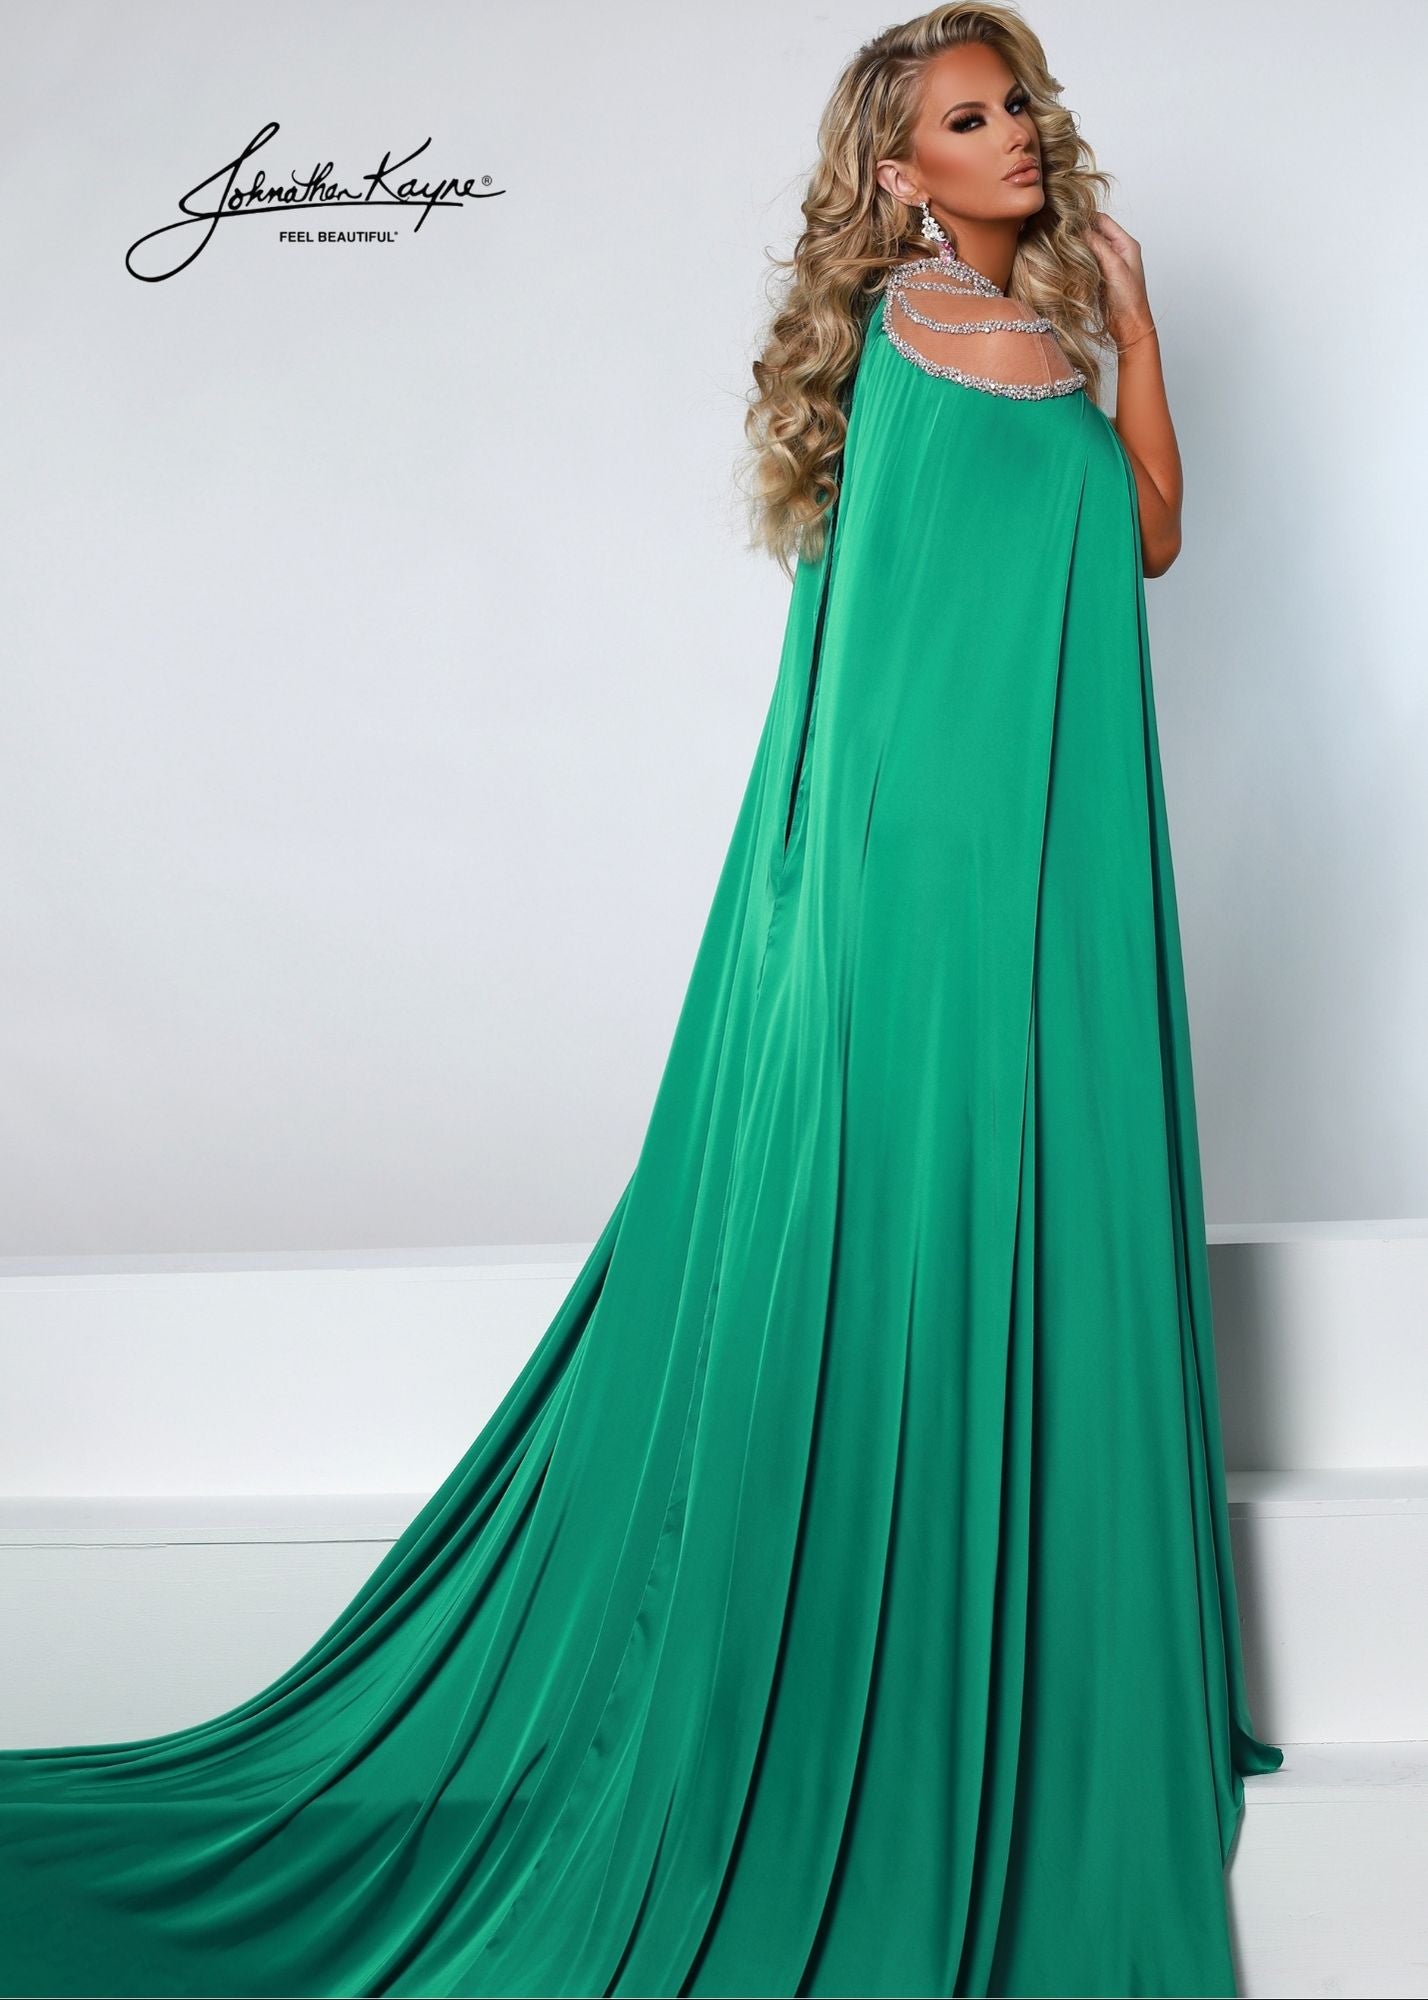 Johnathan Kayne 2535 Long Fitted Velvet Pageant Dress Cape Sheer Crystal Prom Gown A true showstopper! This velvet gown with high neck mesh bodice and sewn in charmeuse skirt will flow across your next pageant stage.  Colors: Emerald, Royal, Black  Sizes: 00, 0, 2, 4, 6, 8, 10, 12, 14, 16, 18  Fabric Stretch Velvet, Stretch Lining